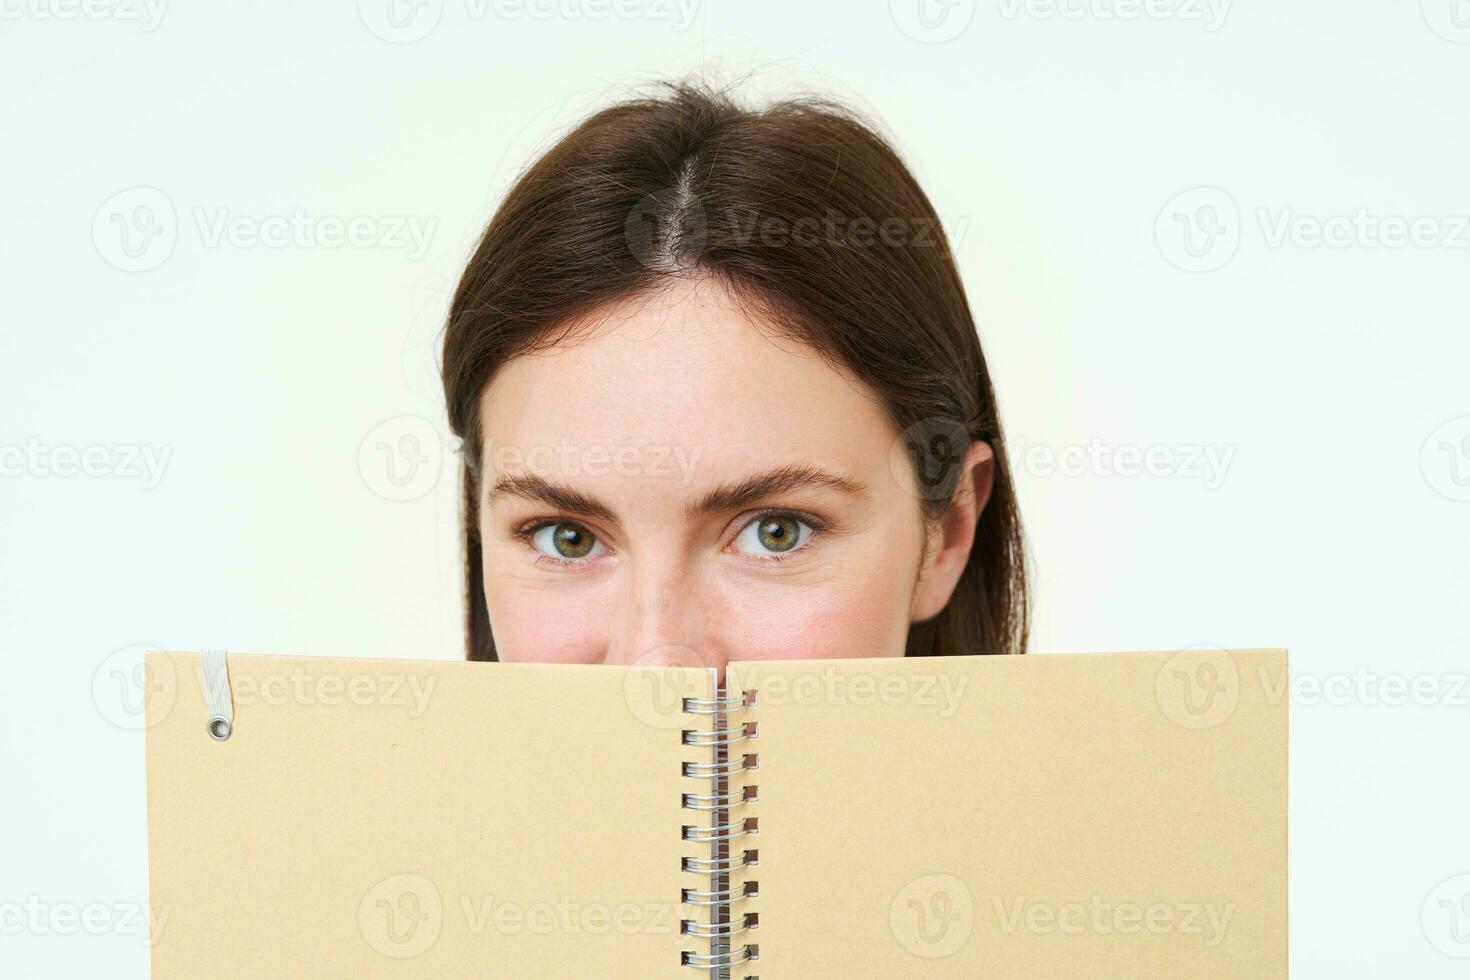 Young woman holds notebook daily planner next to her face, writing down homework, making notes, looking thoughtful, standing over white background photo